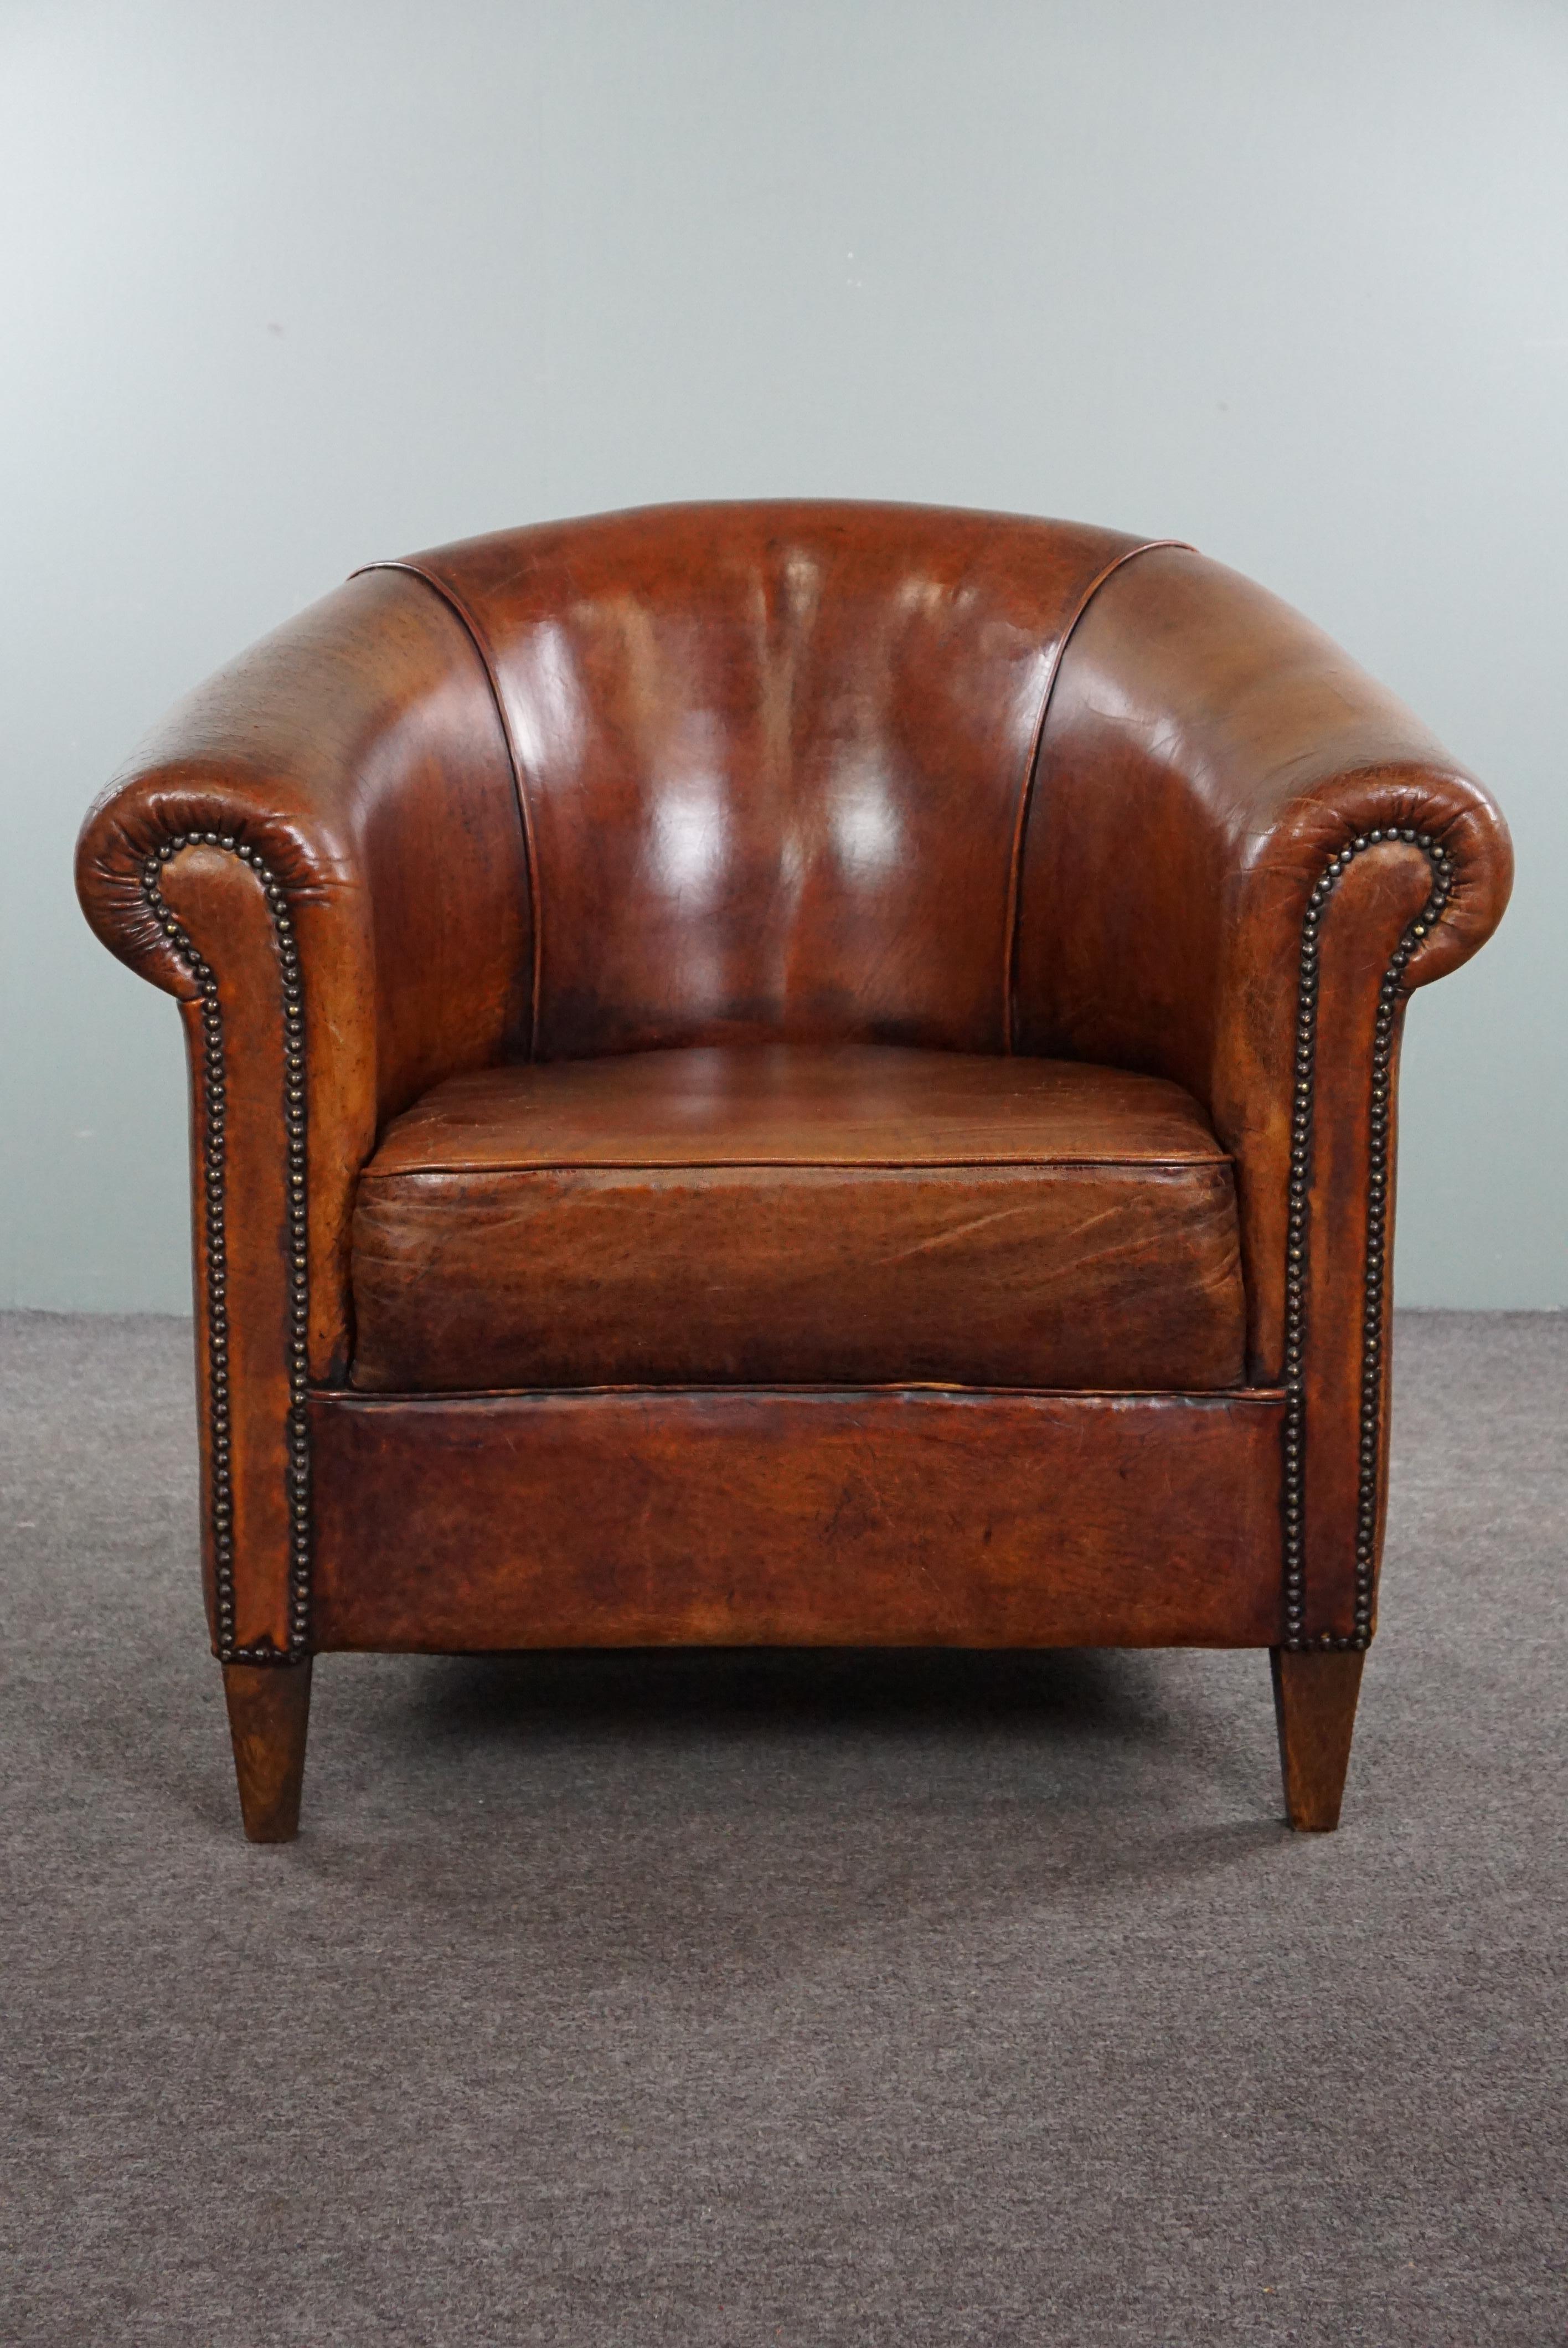 Offered is this very beautiful sheepskin club chair. This exquisite chair exudes elegance and class, thanks to the warm sheepskin leather and refined details such as the decorative nails. The sheepskin leather has been carefully maintained and